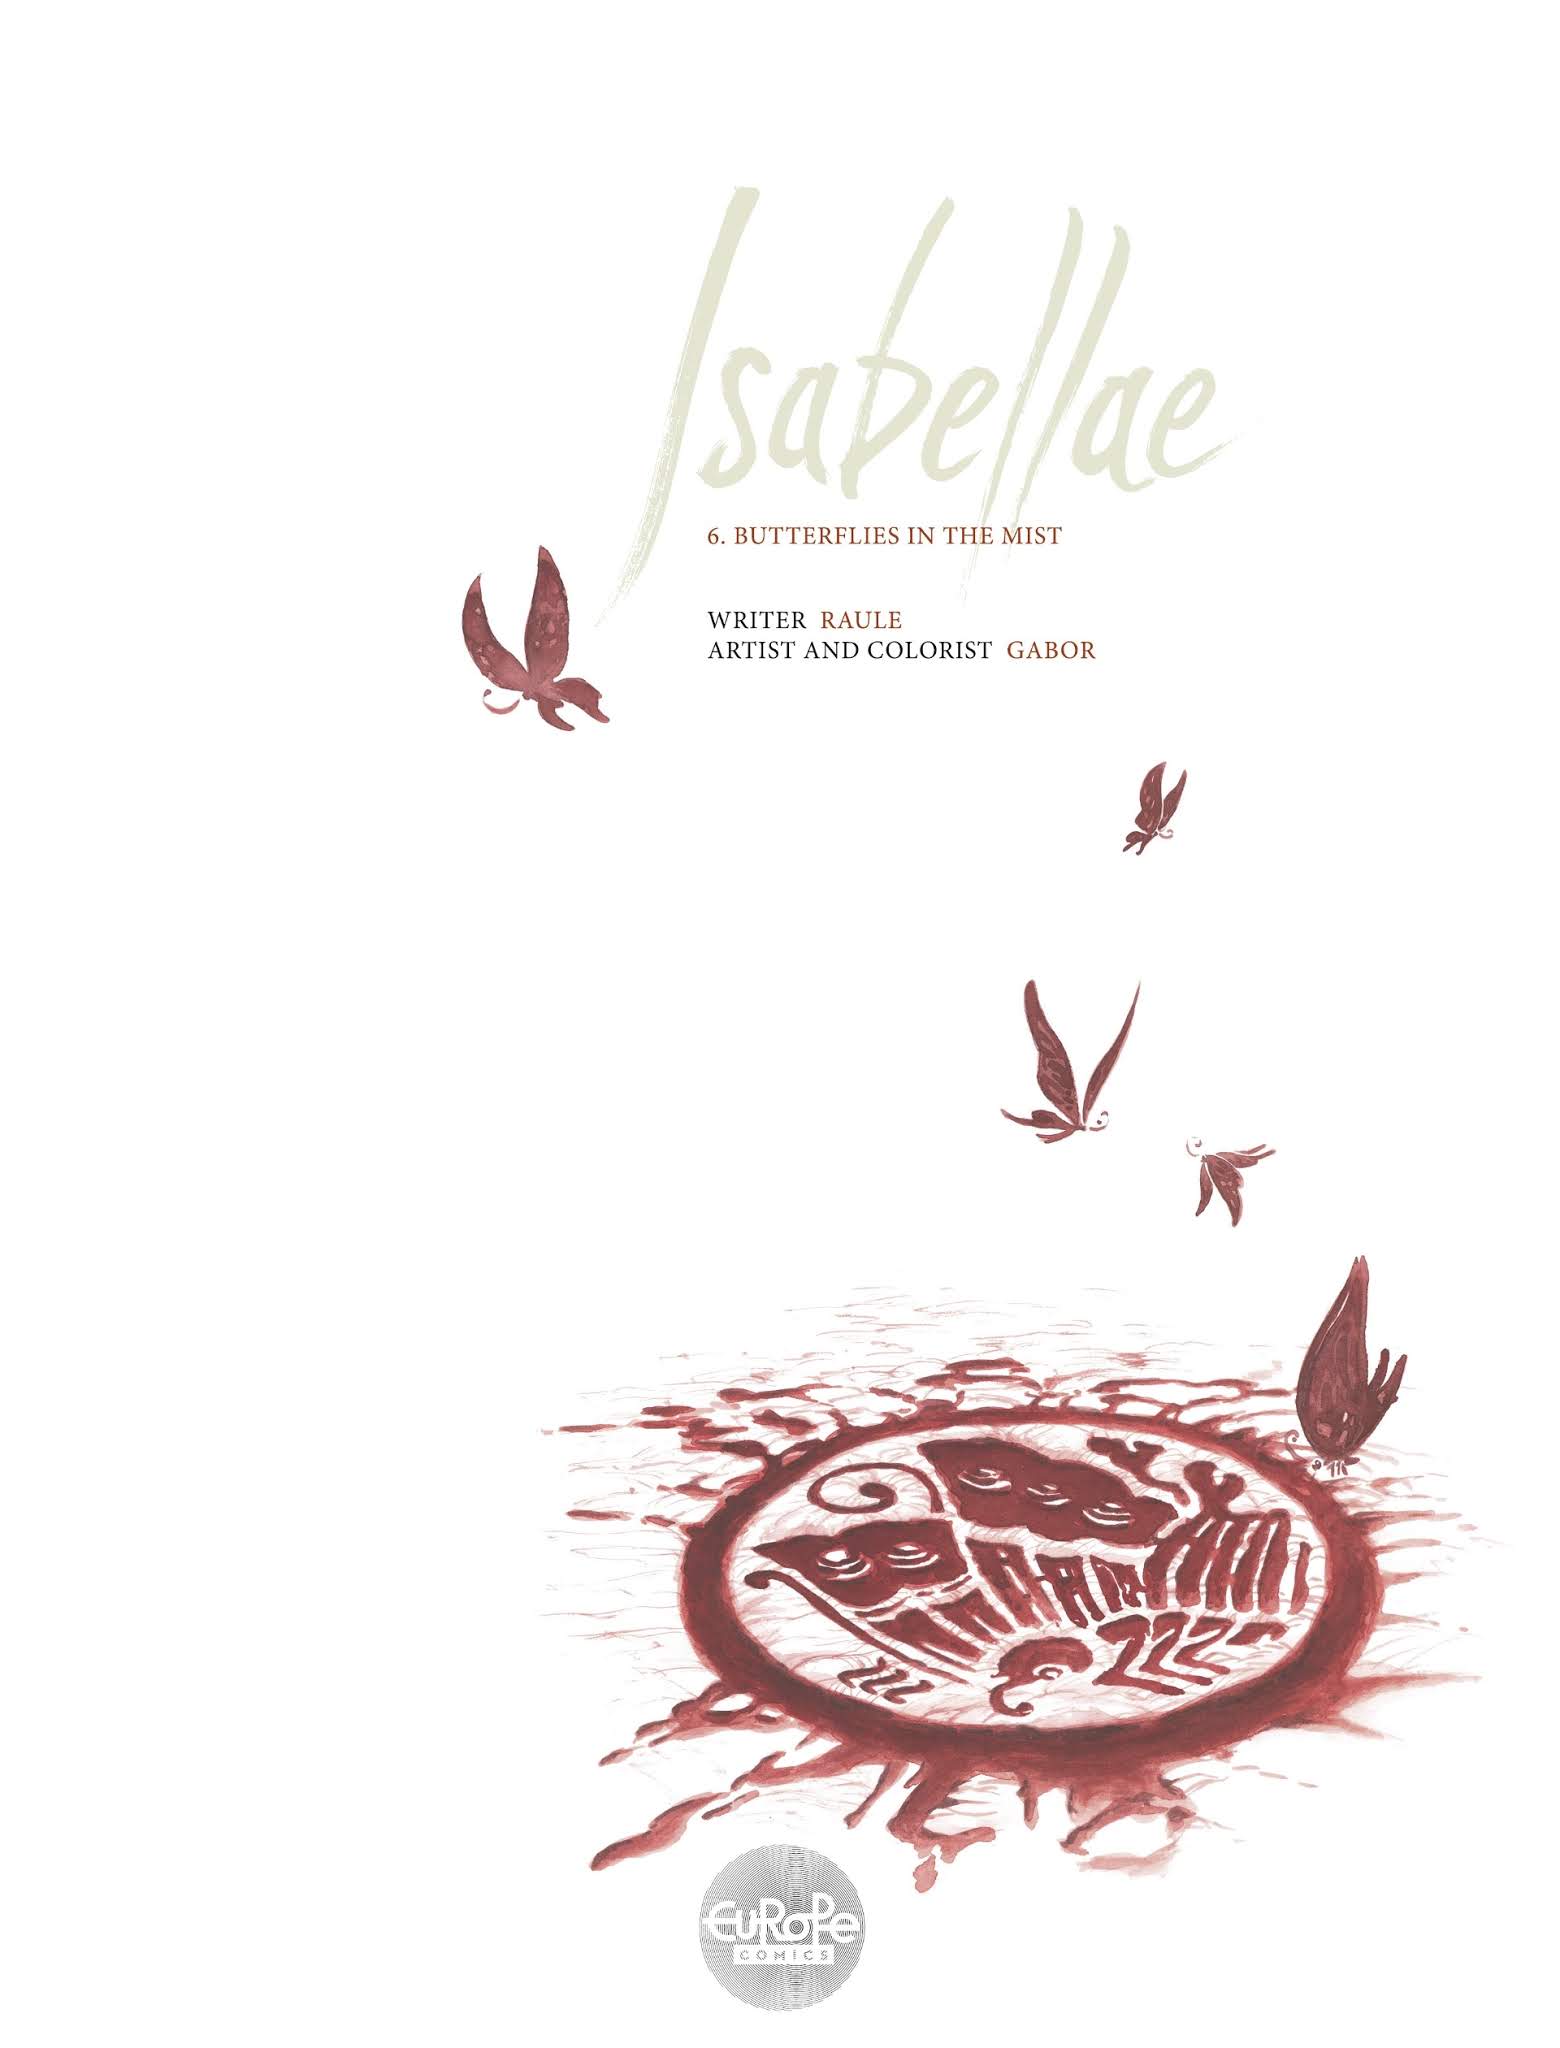 Read online Isabellae comic -  Issue #6 - 2